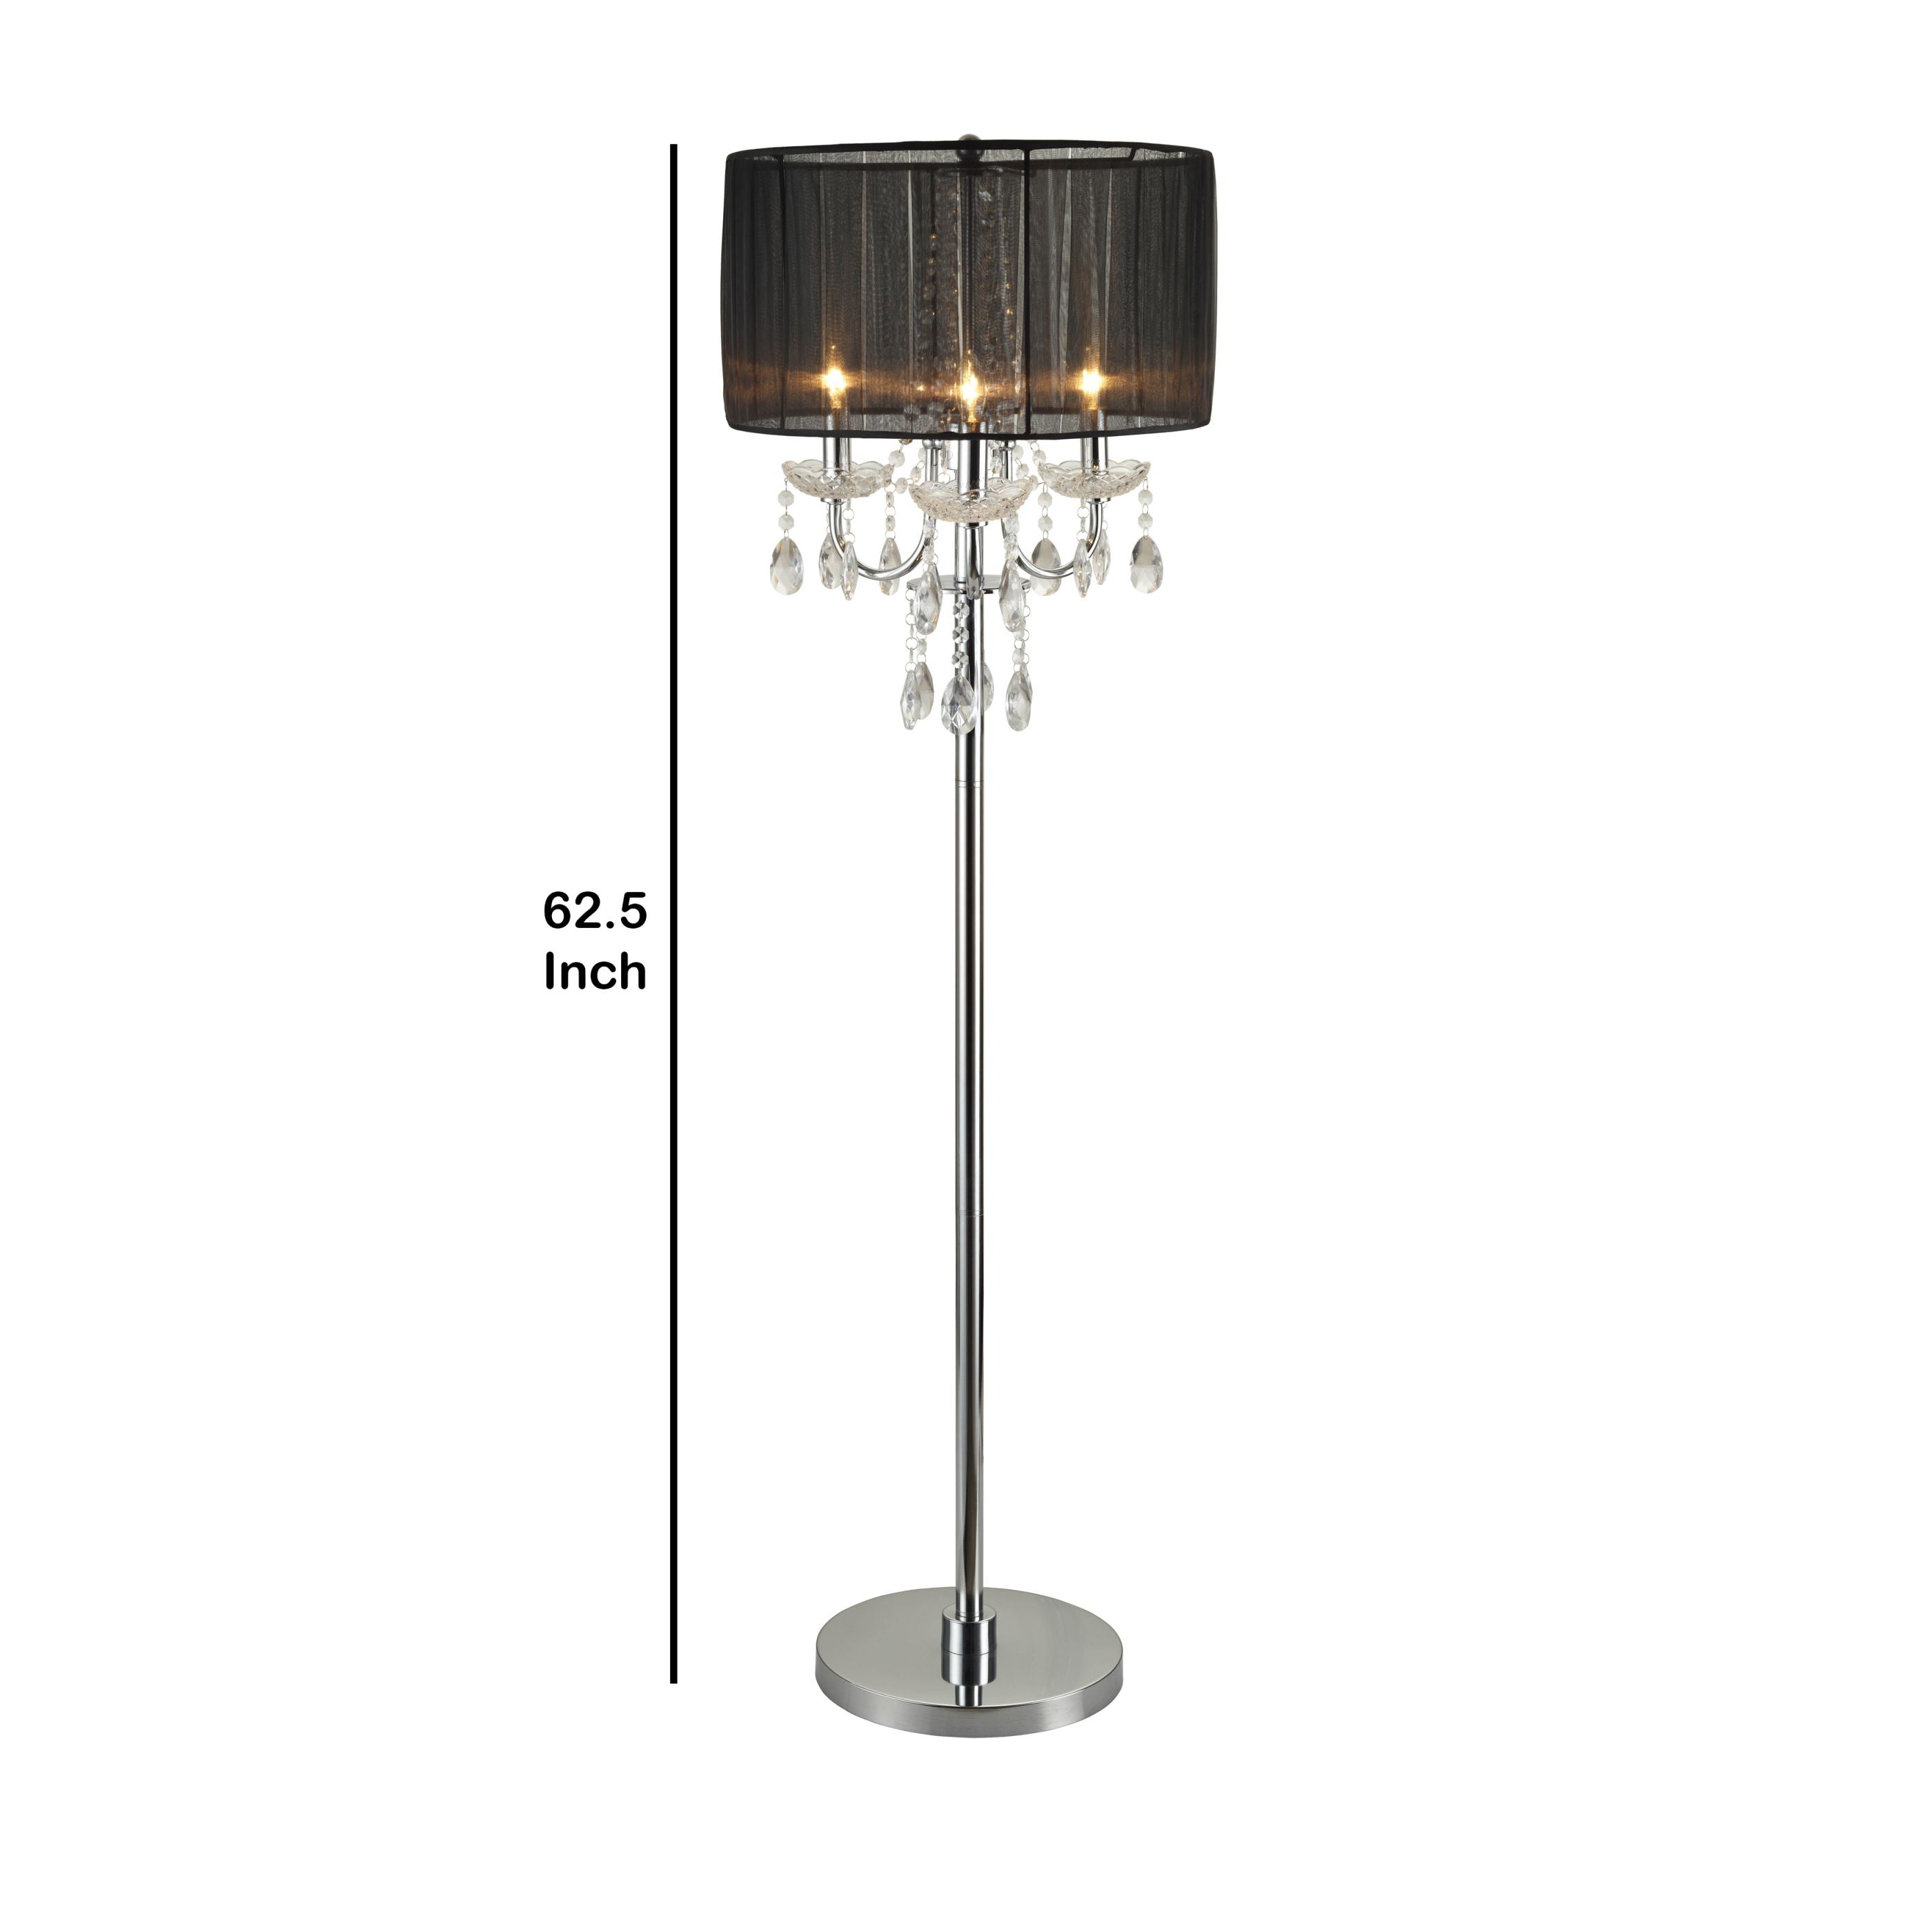 Round Fabric Wrapped Floor Lamp With Crystal Inlay, Gray And Silver By Benzara